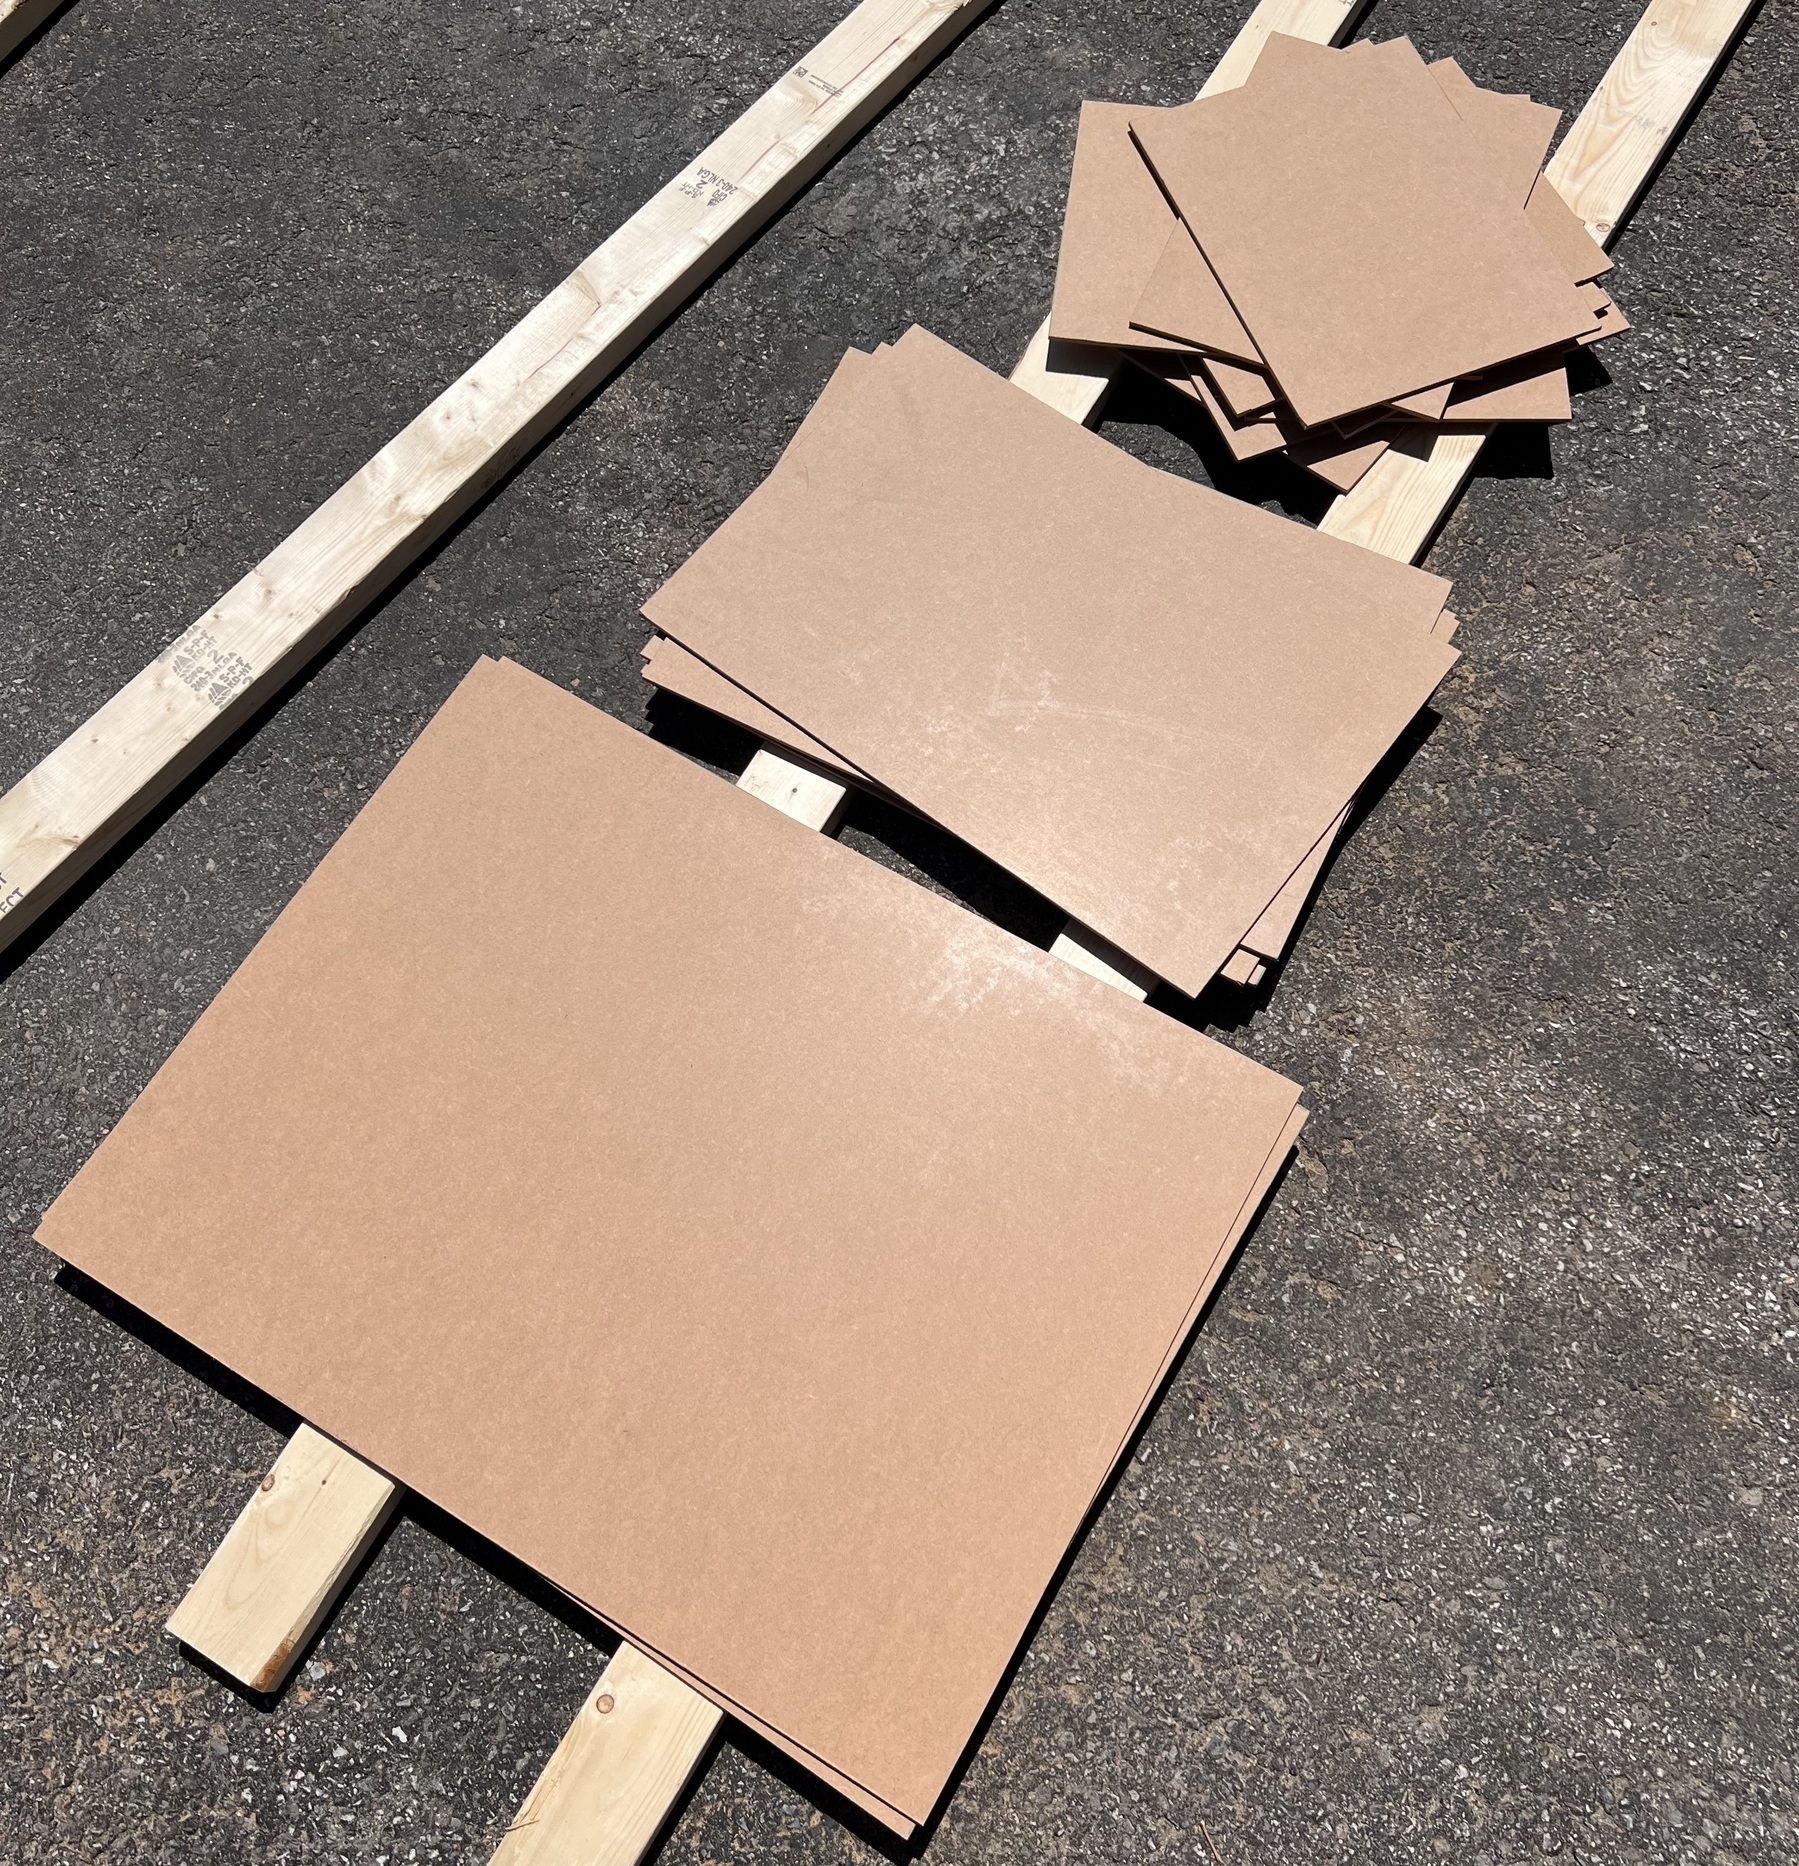 Fourteen pieces of hardboard cut up and lying in 3 piles on my driveway. 